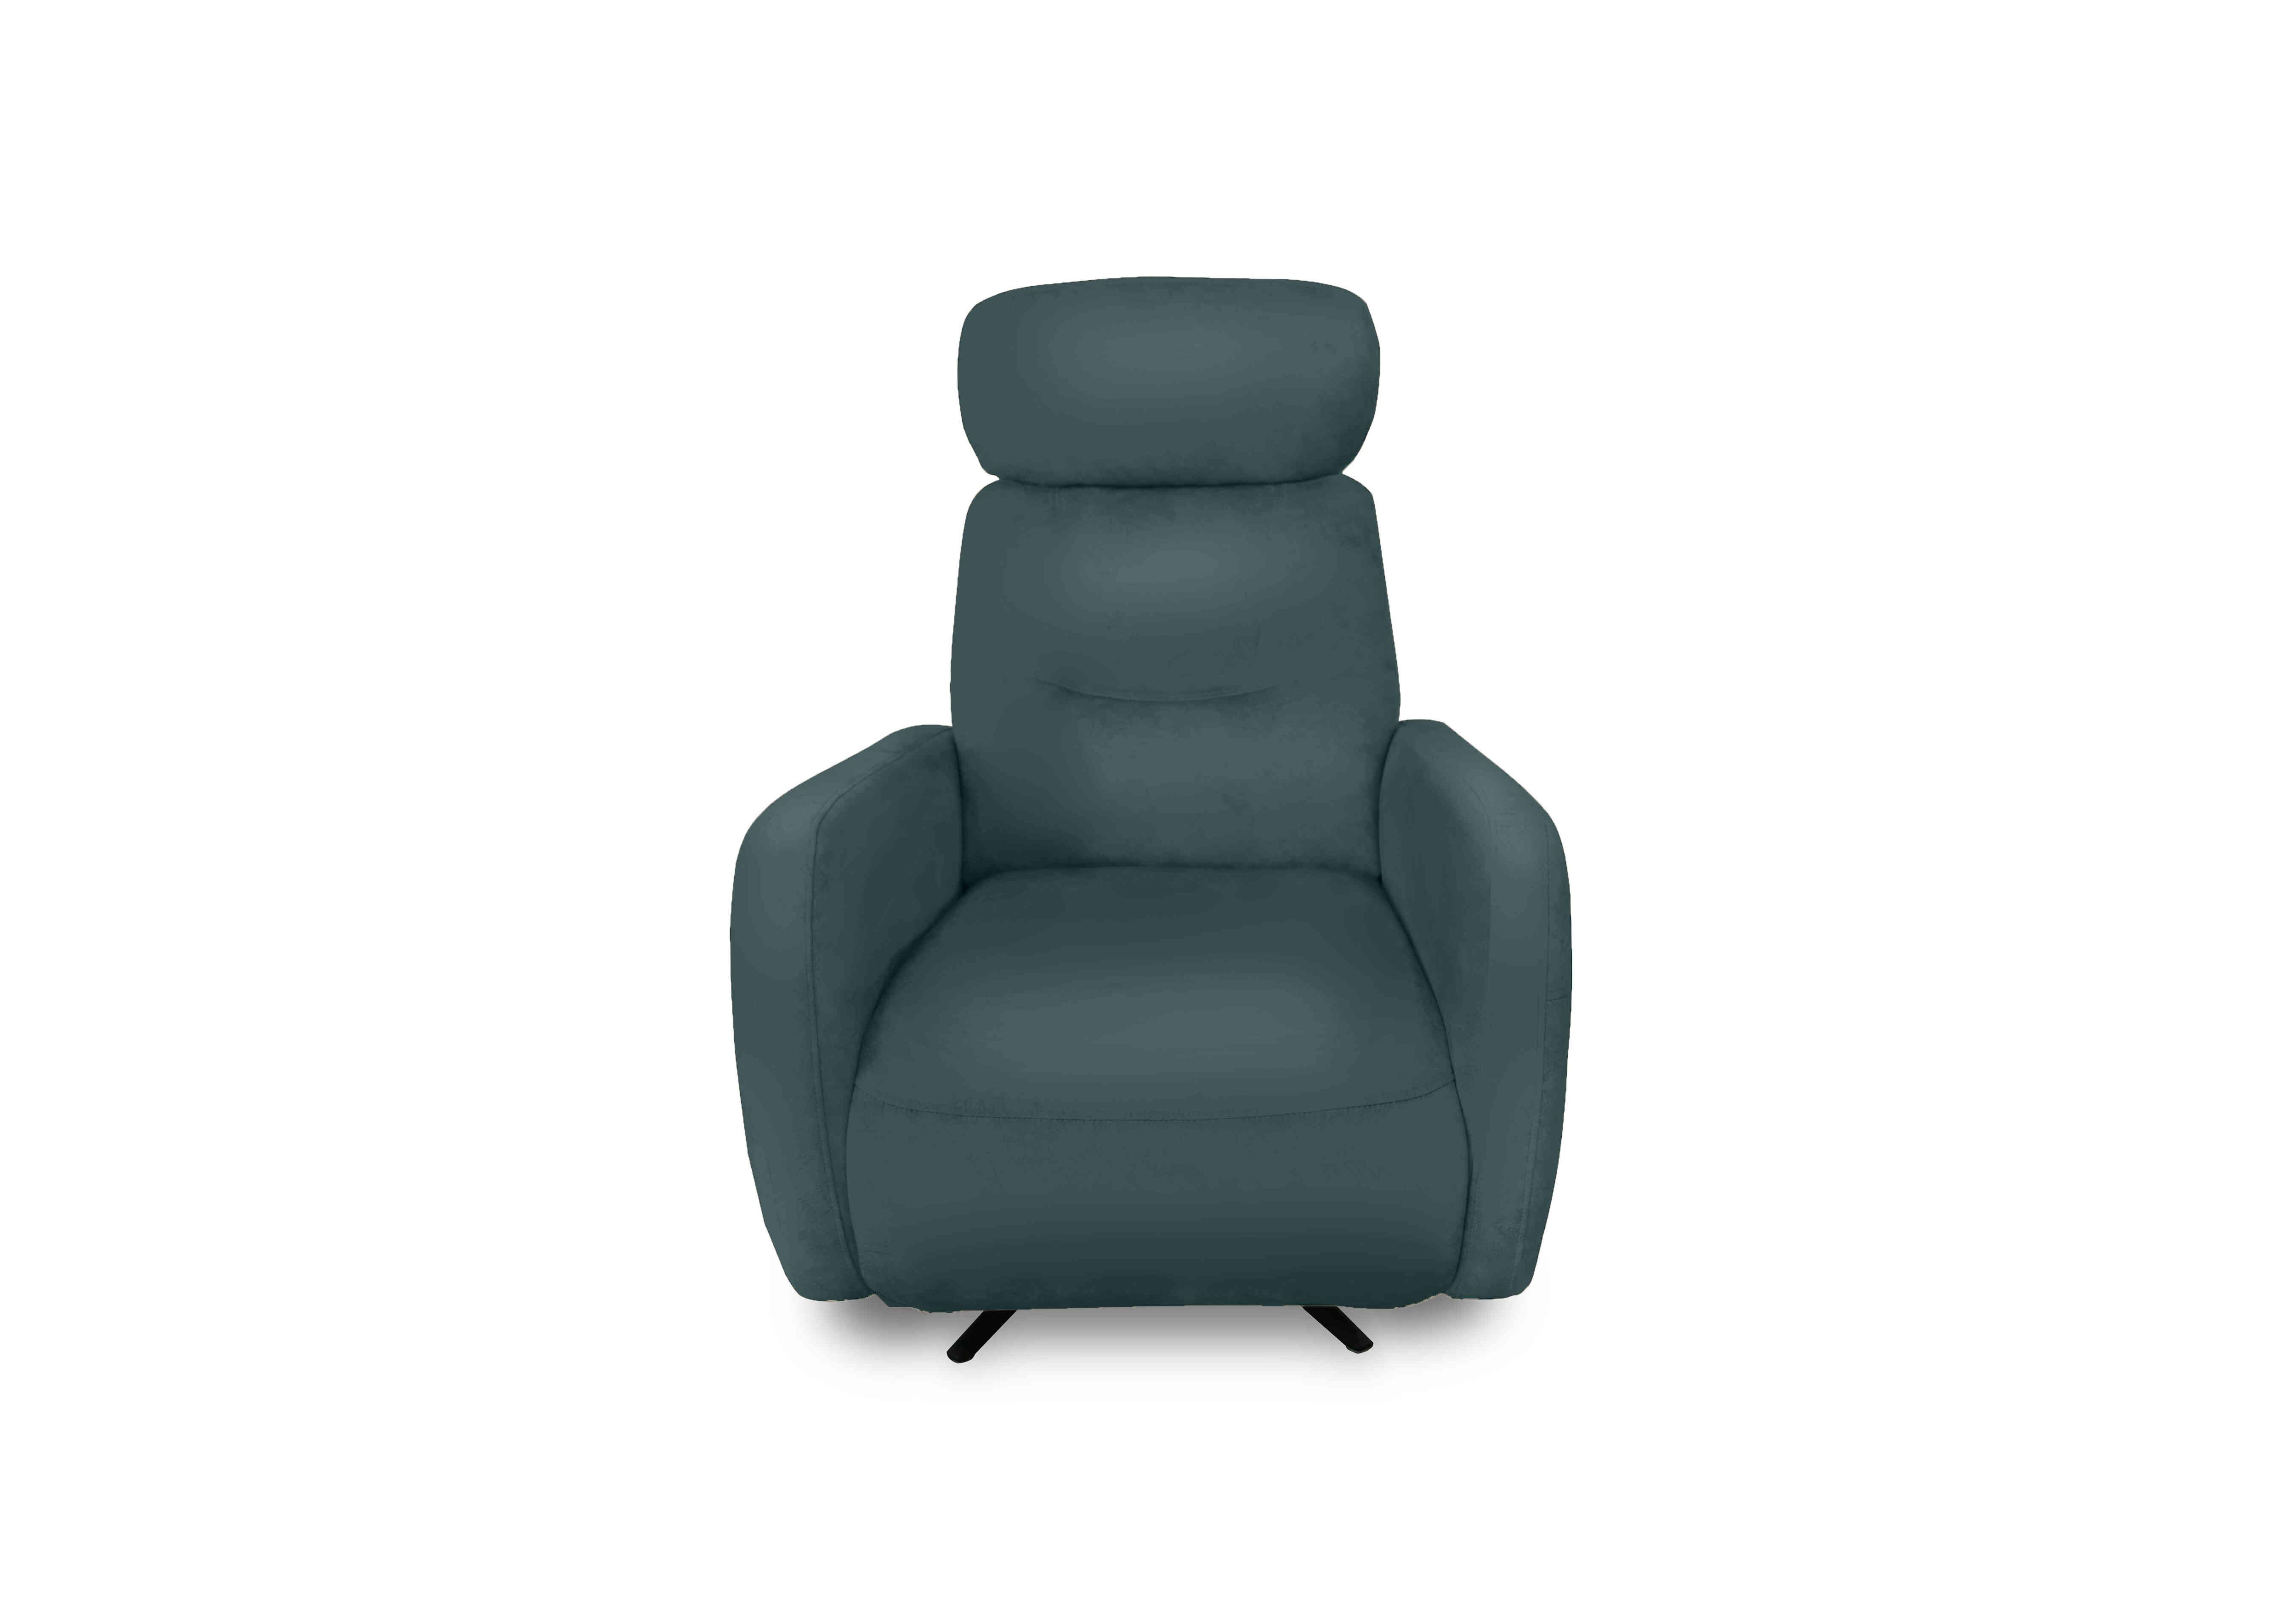 Designer Chair Collection Tokyo Leather Manual Recliner Swivel Chair in Bv-301e Lake Green on Furniture Village